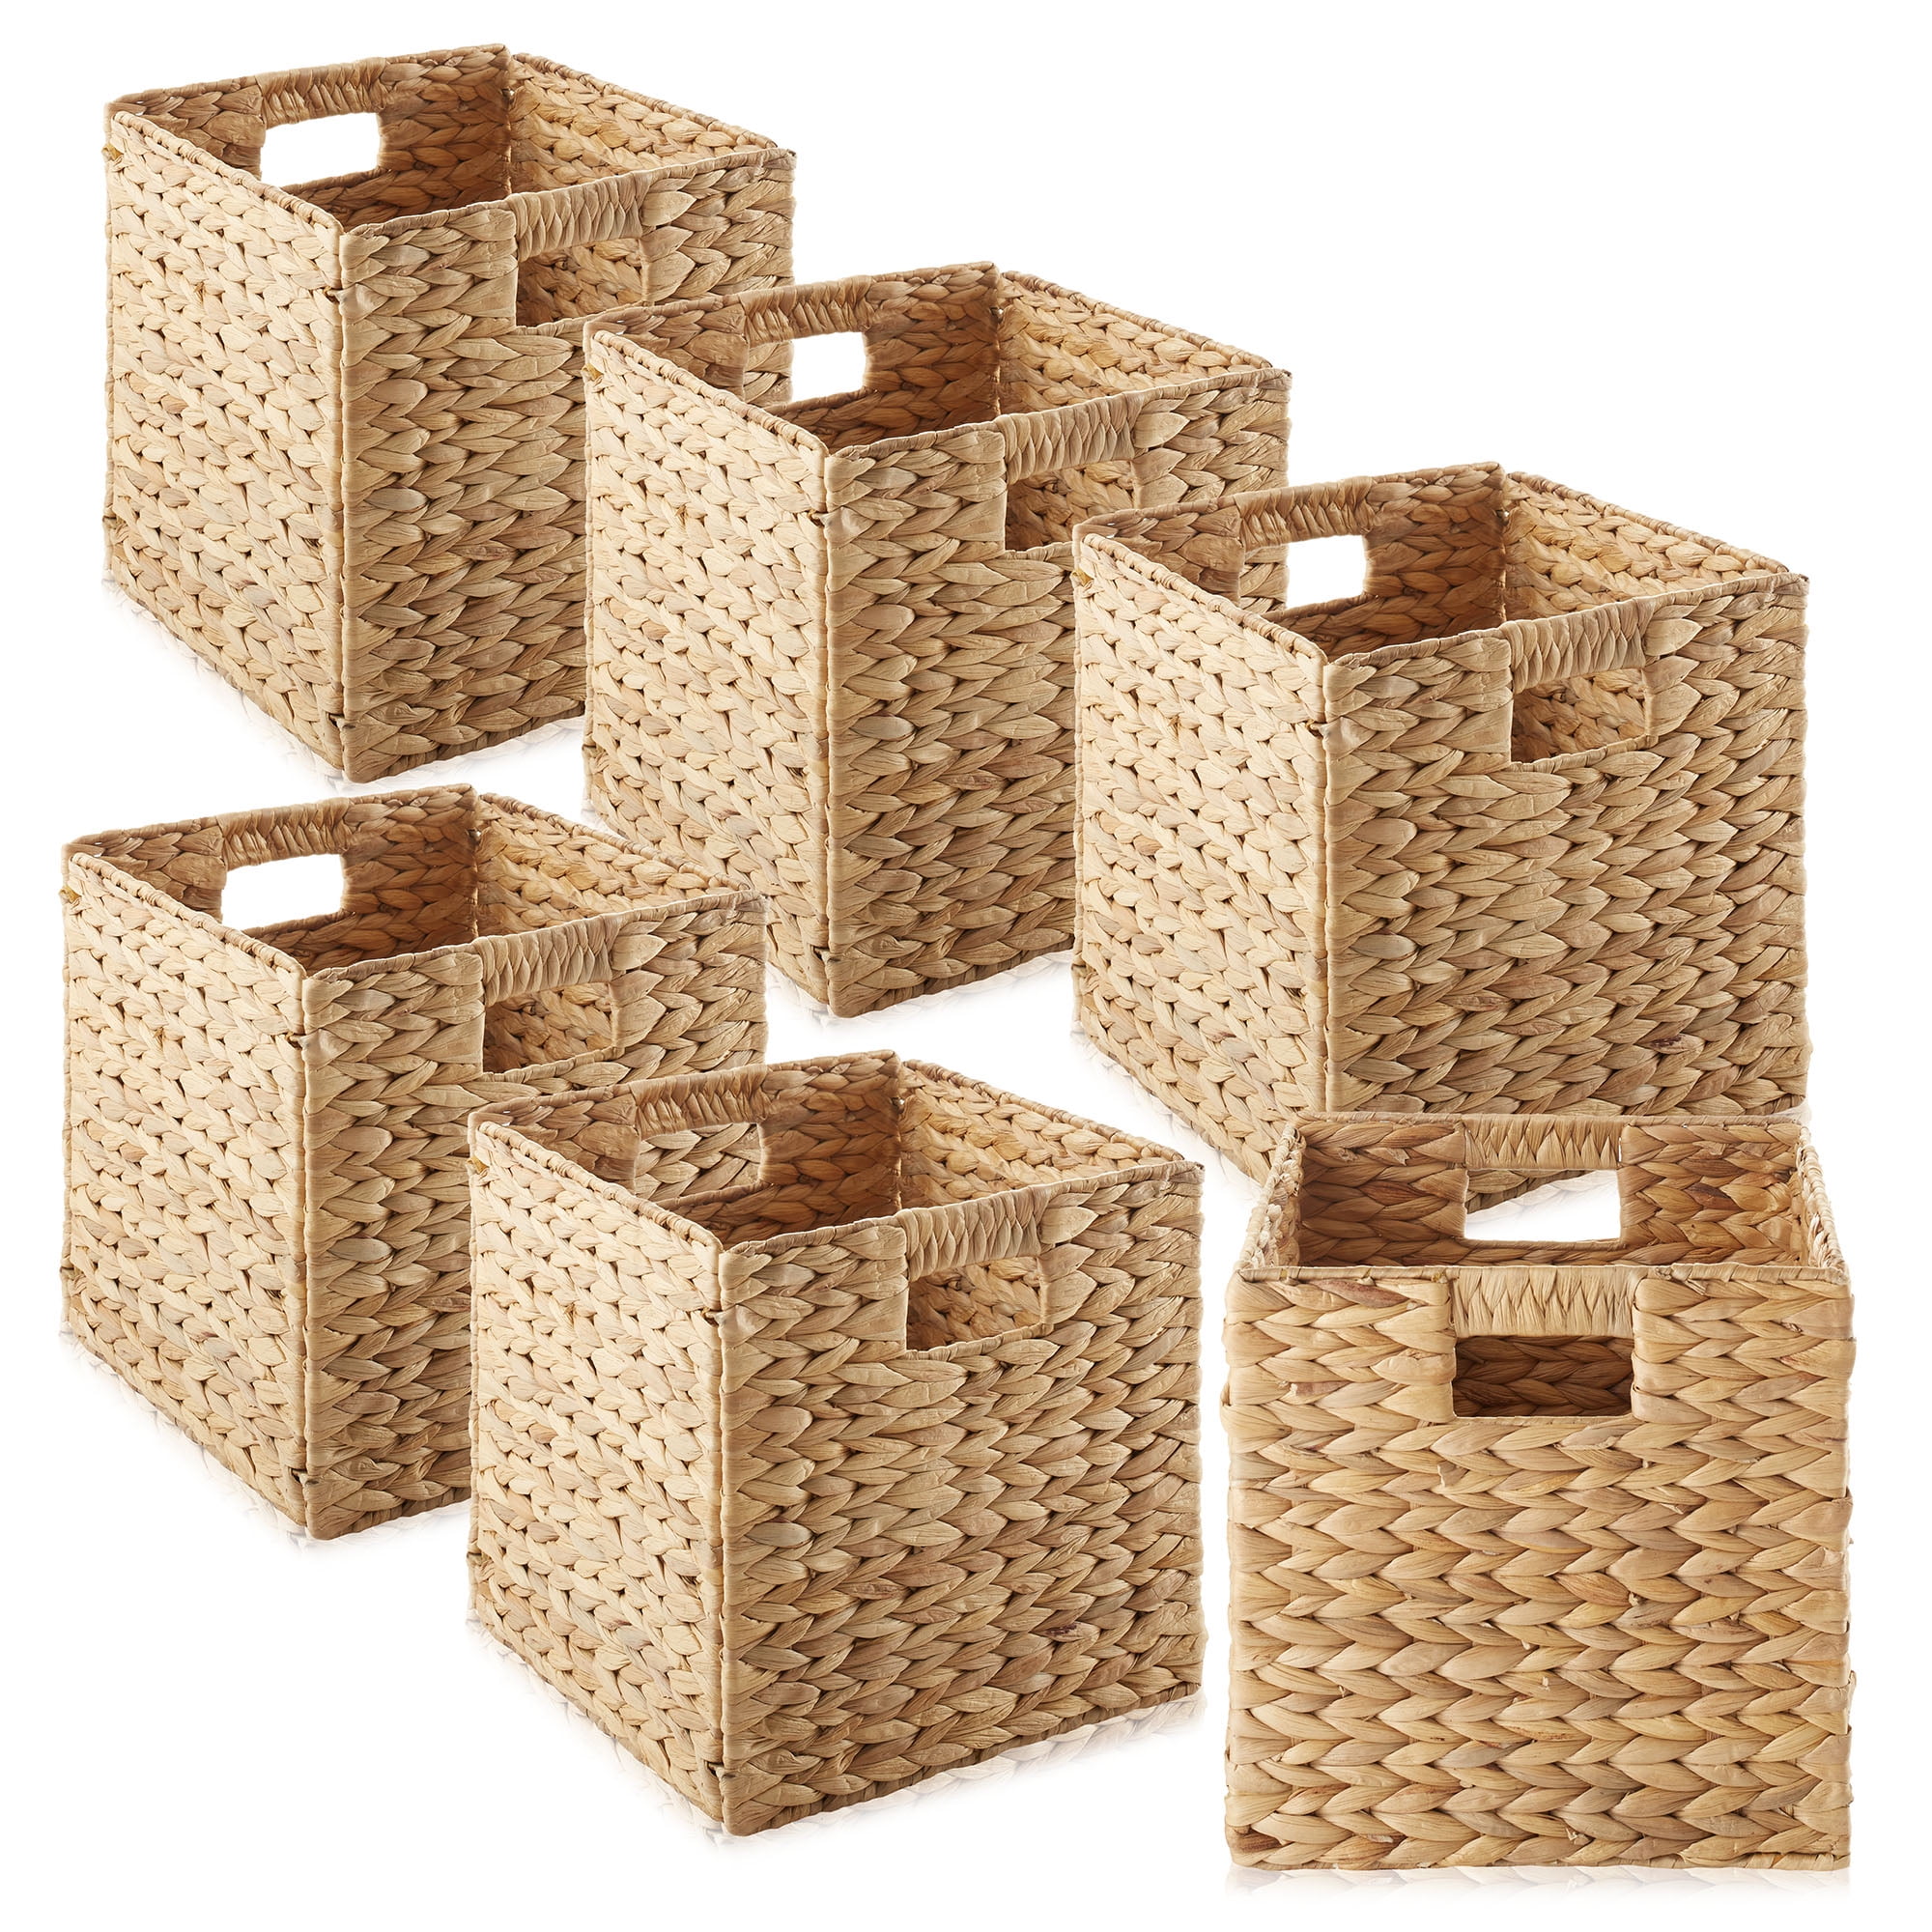 Large Baskets - 3 Group Colors - Set of 6 by Really Good Stuff